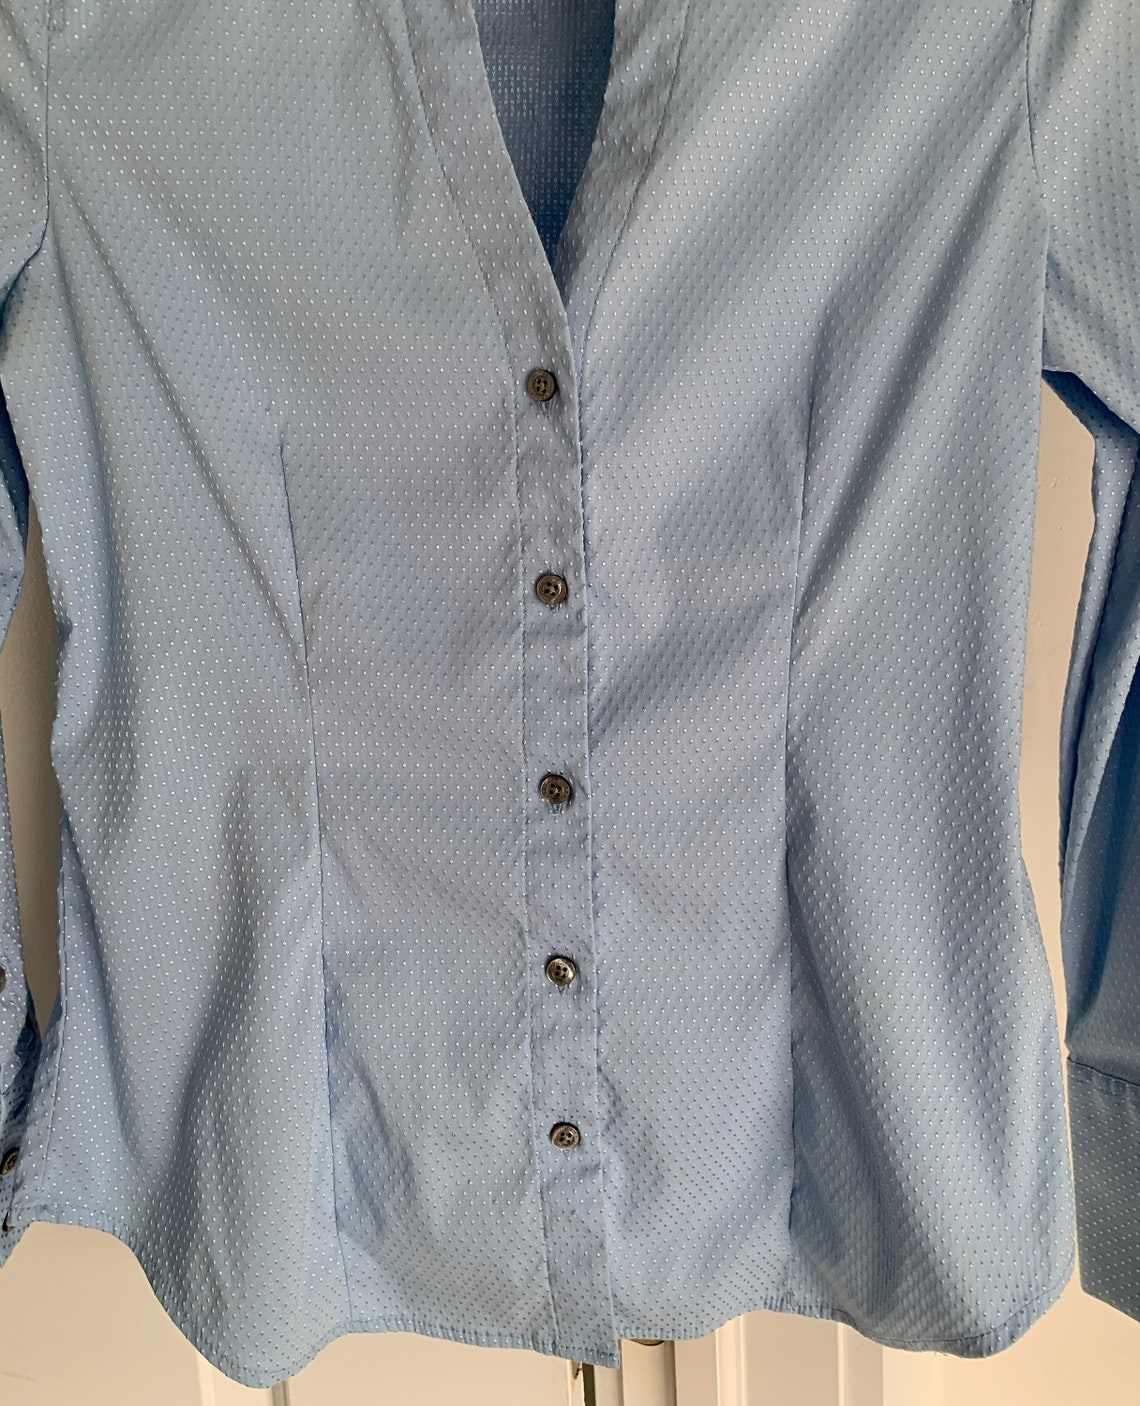 Vintage Periwinkle Button up Shirt - Etsy